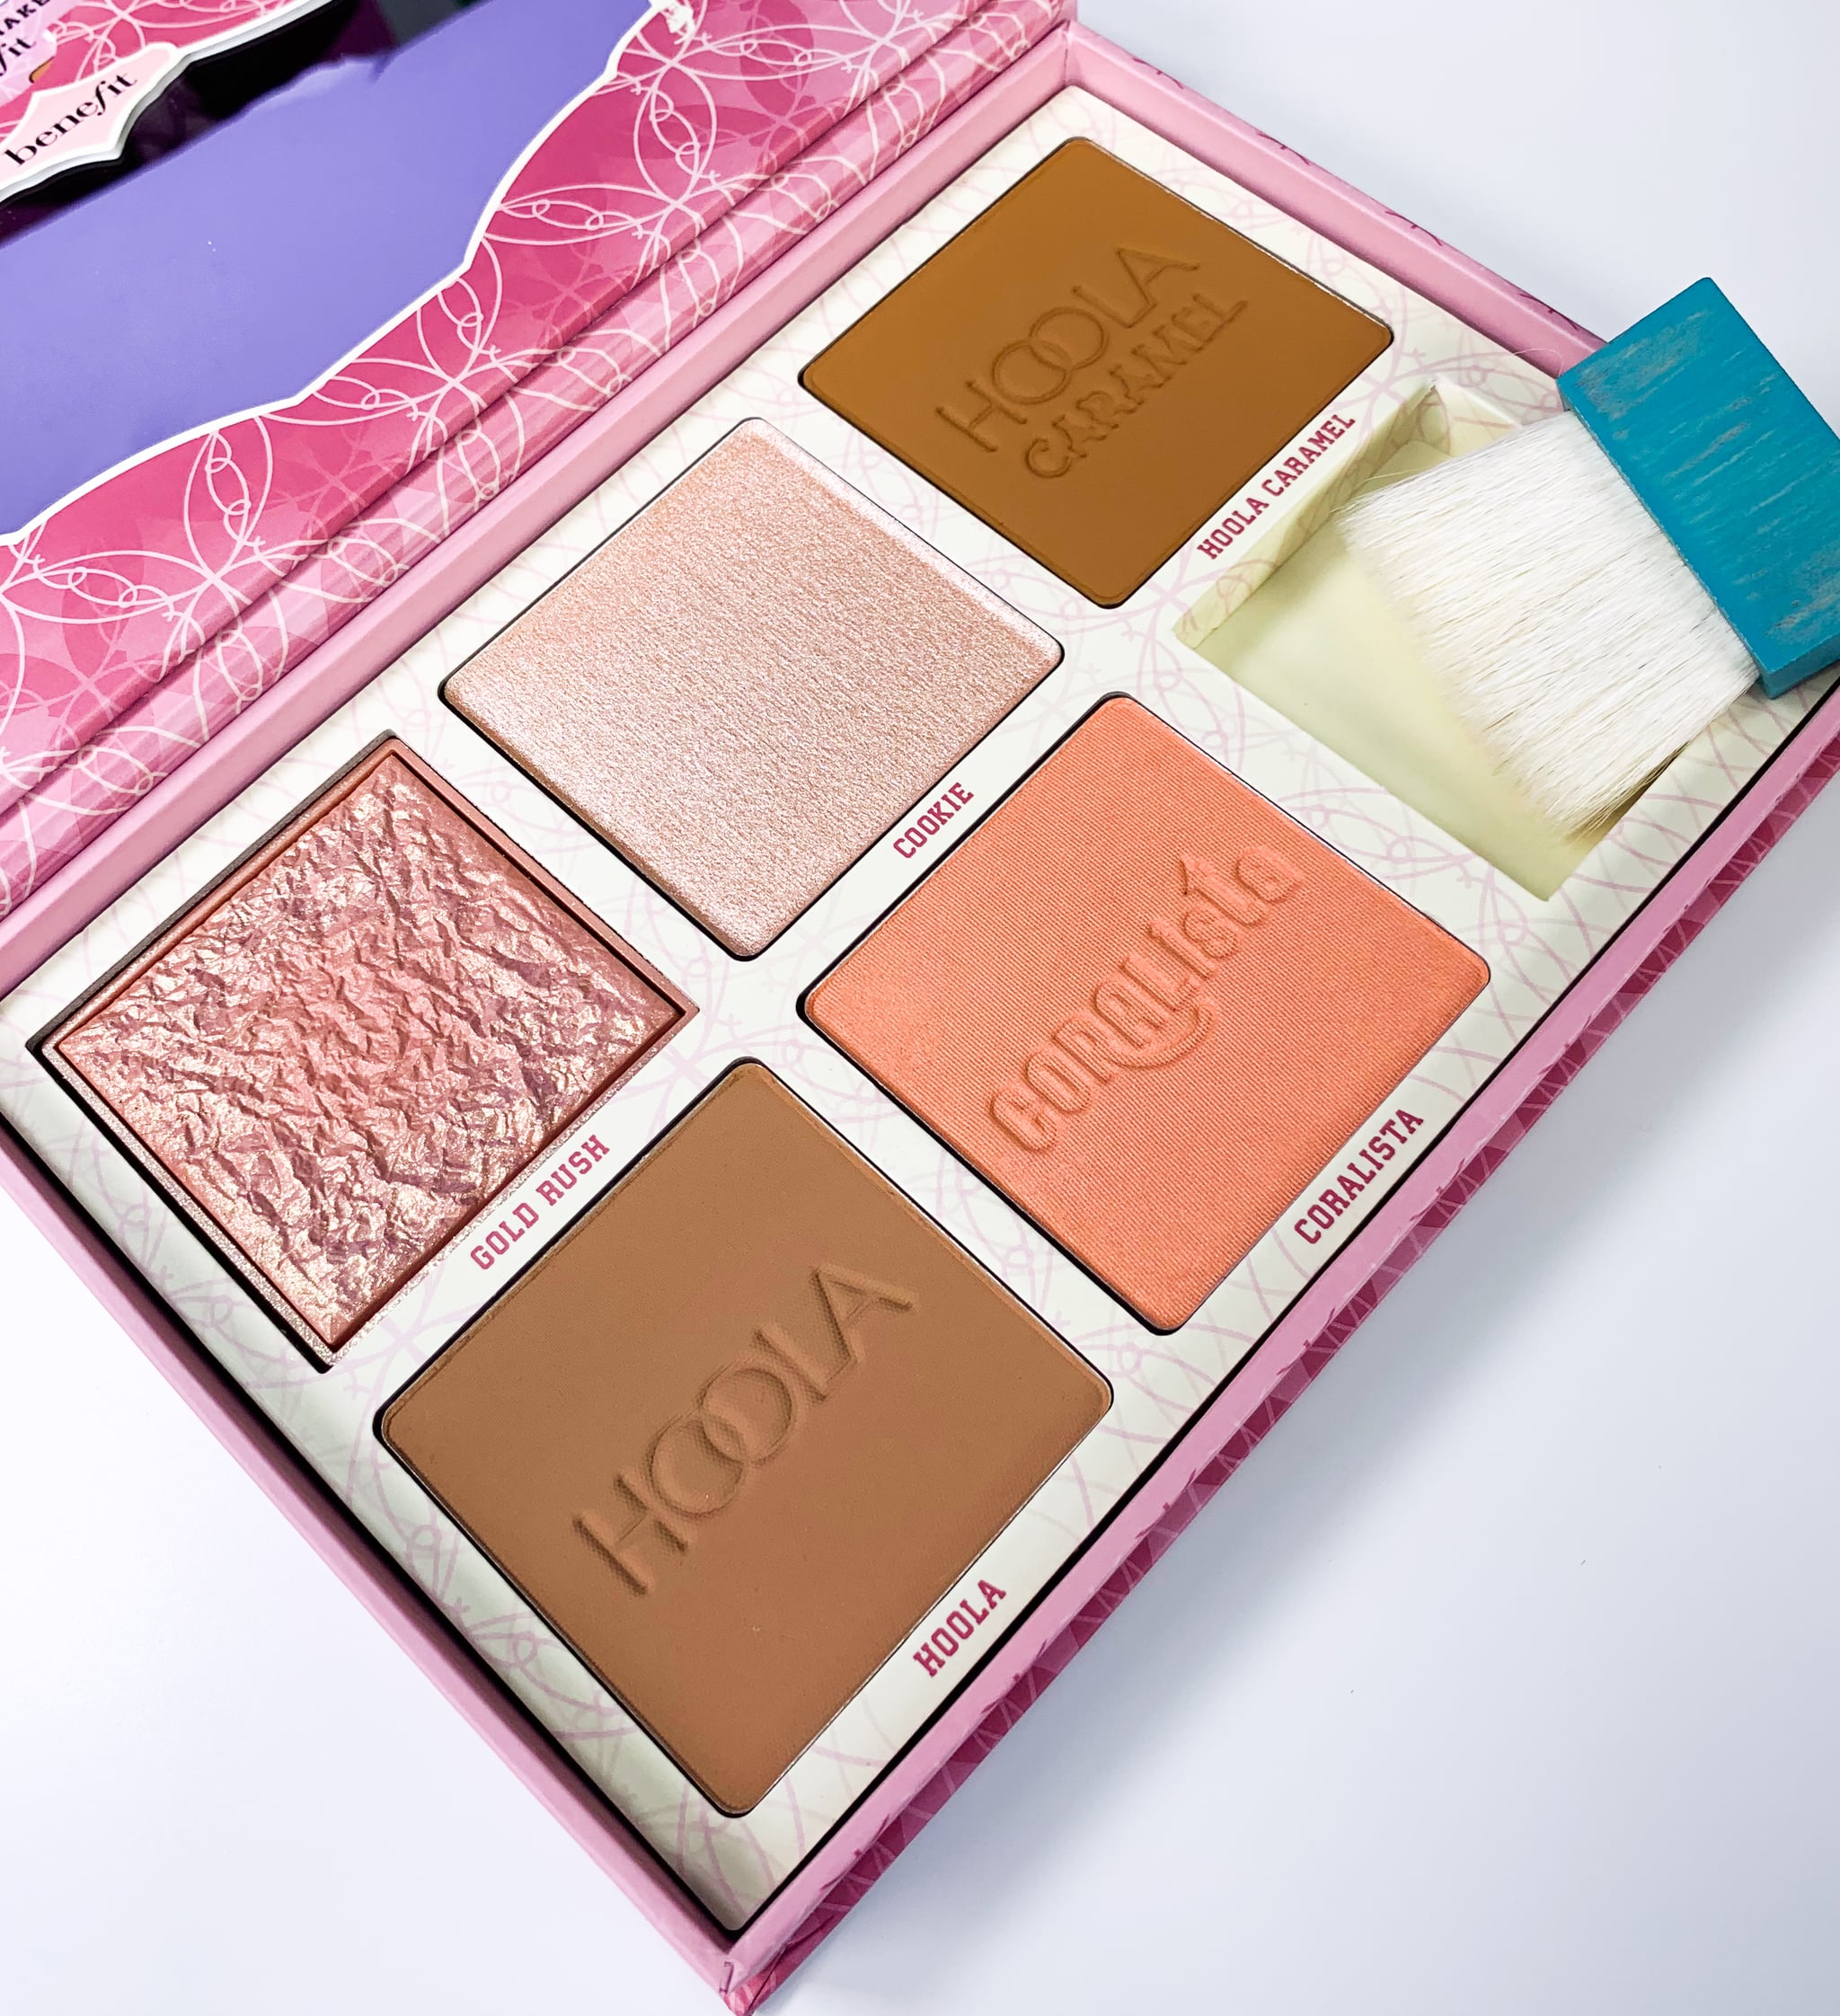 Cheekleaders: Bronze Squad Palette | Benefit to Launch 2 Deeper Shades of and New Cheek This | POPSUGAR Beauty Photo 4